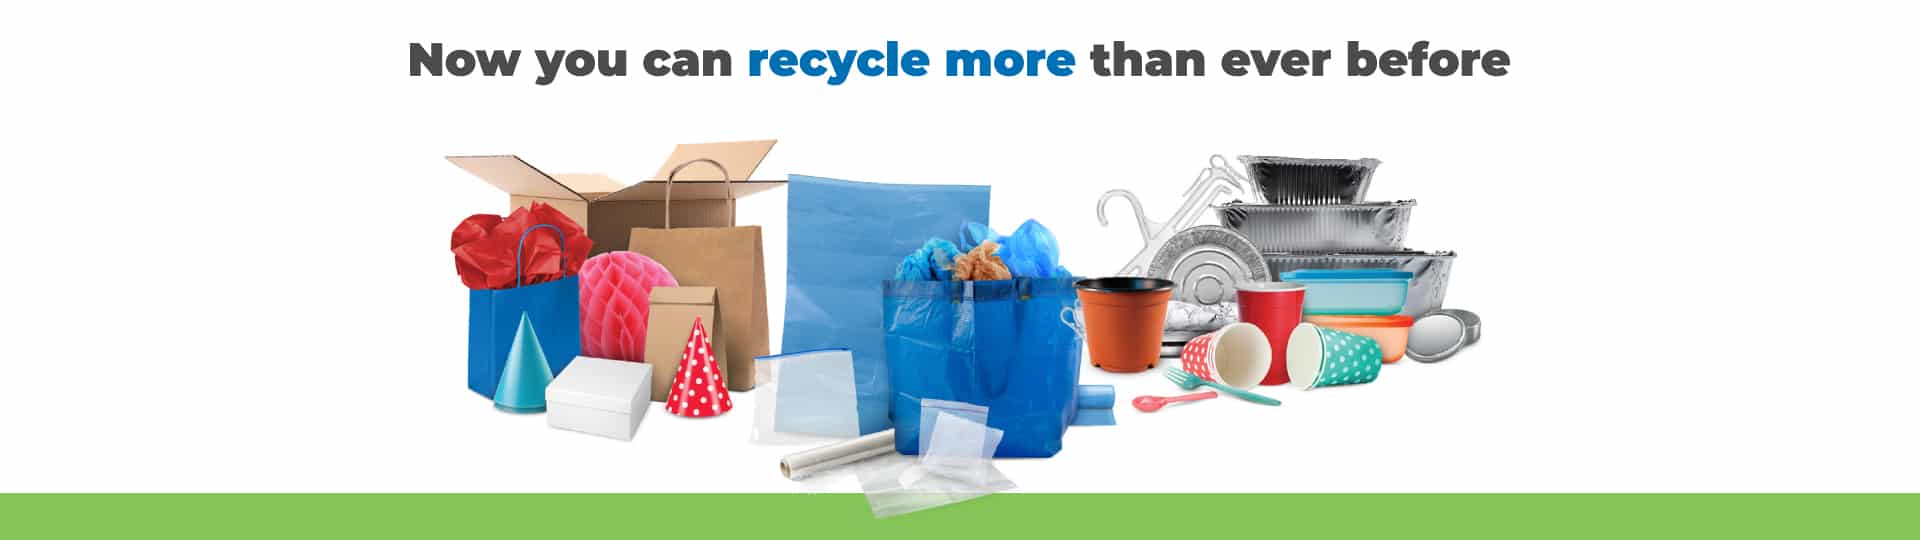 photo of new items accepted in the Recycle BC program